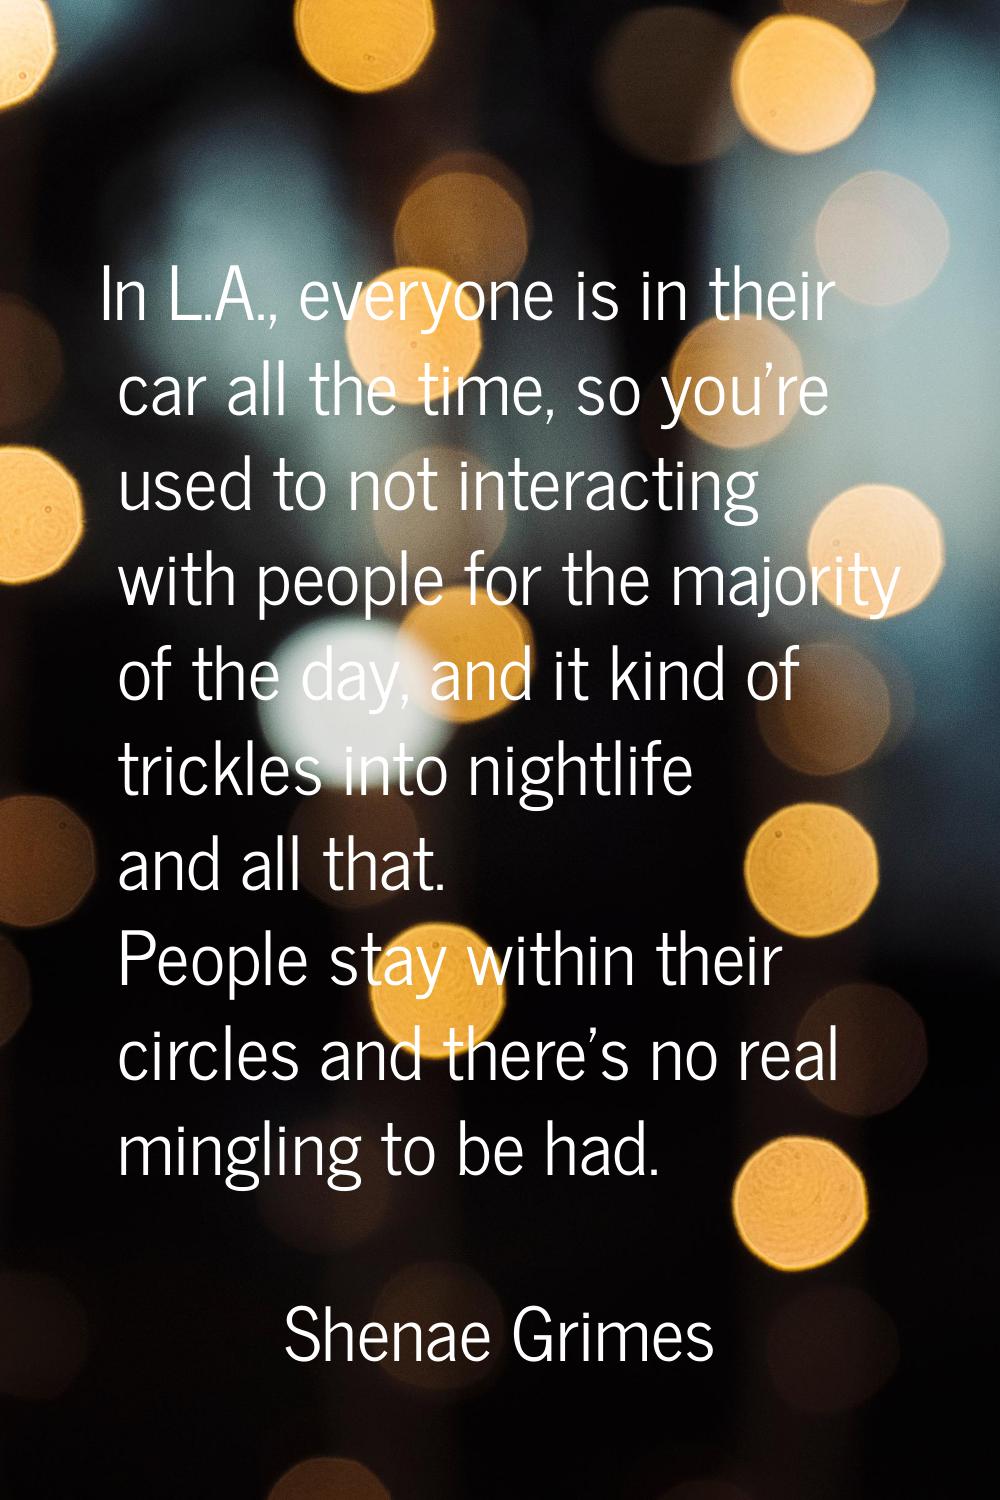 In L.A., everyone is in their car all the time, so you're used to not interacting with people for t